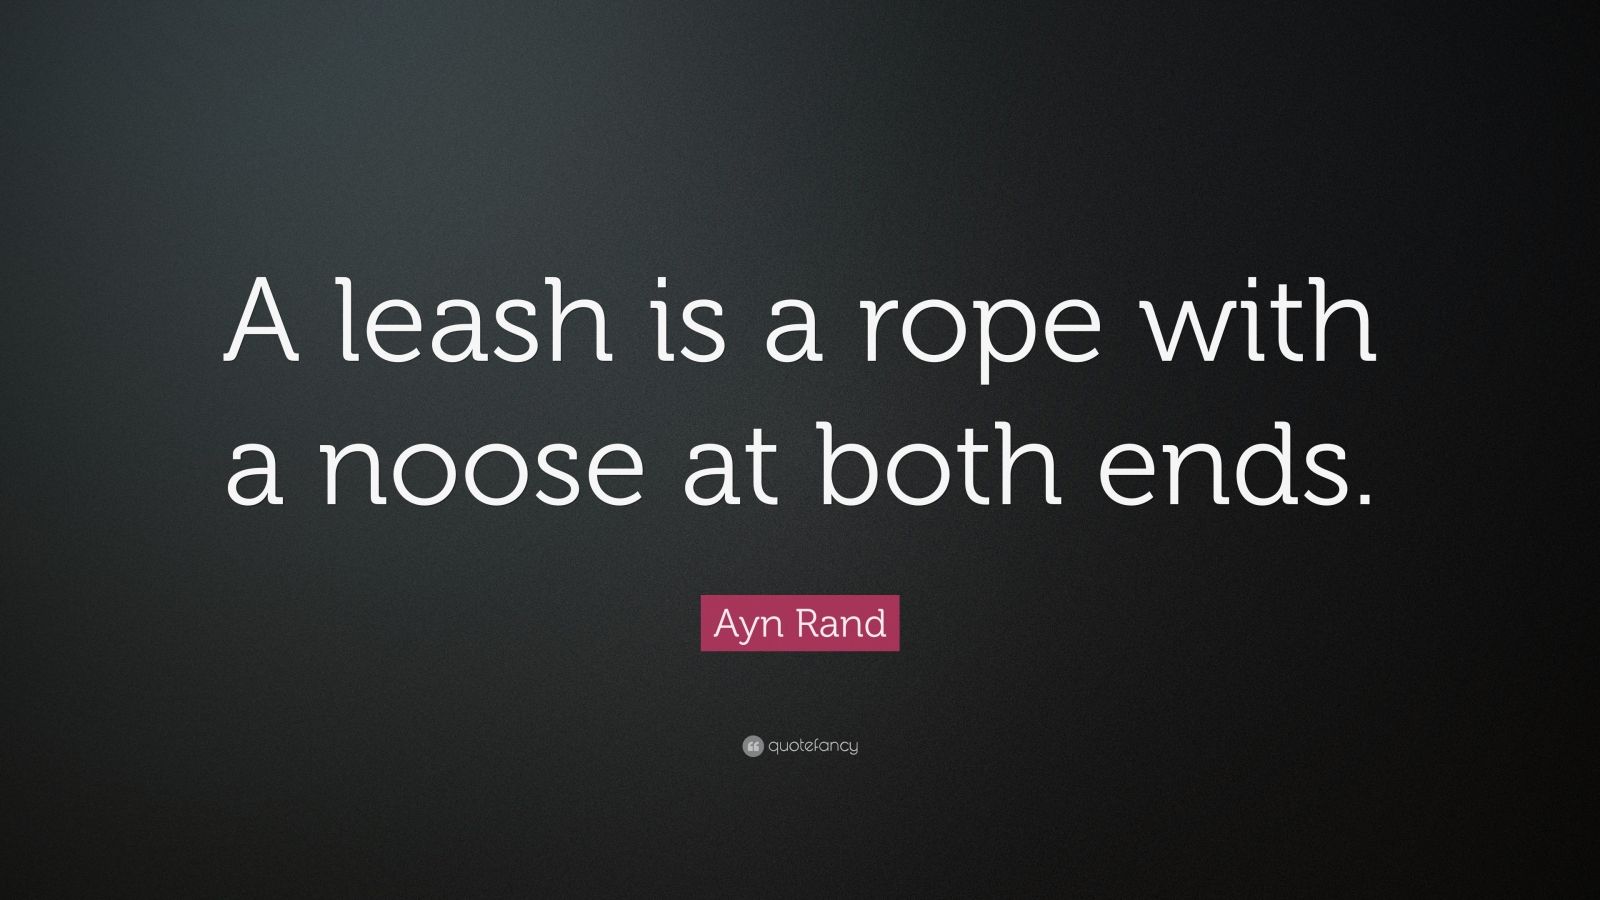 Ayn Rand Quote: “A leash is a rope with